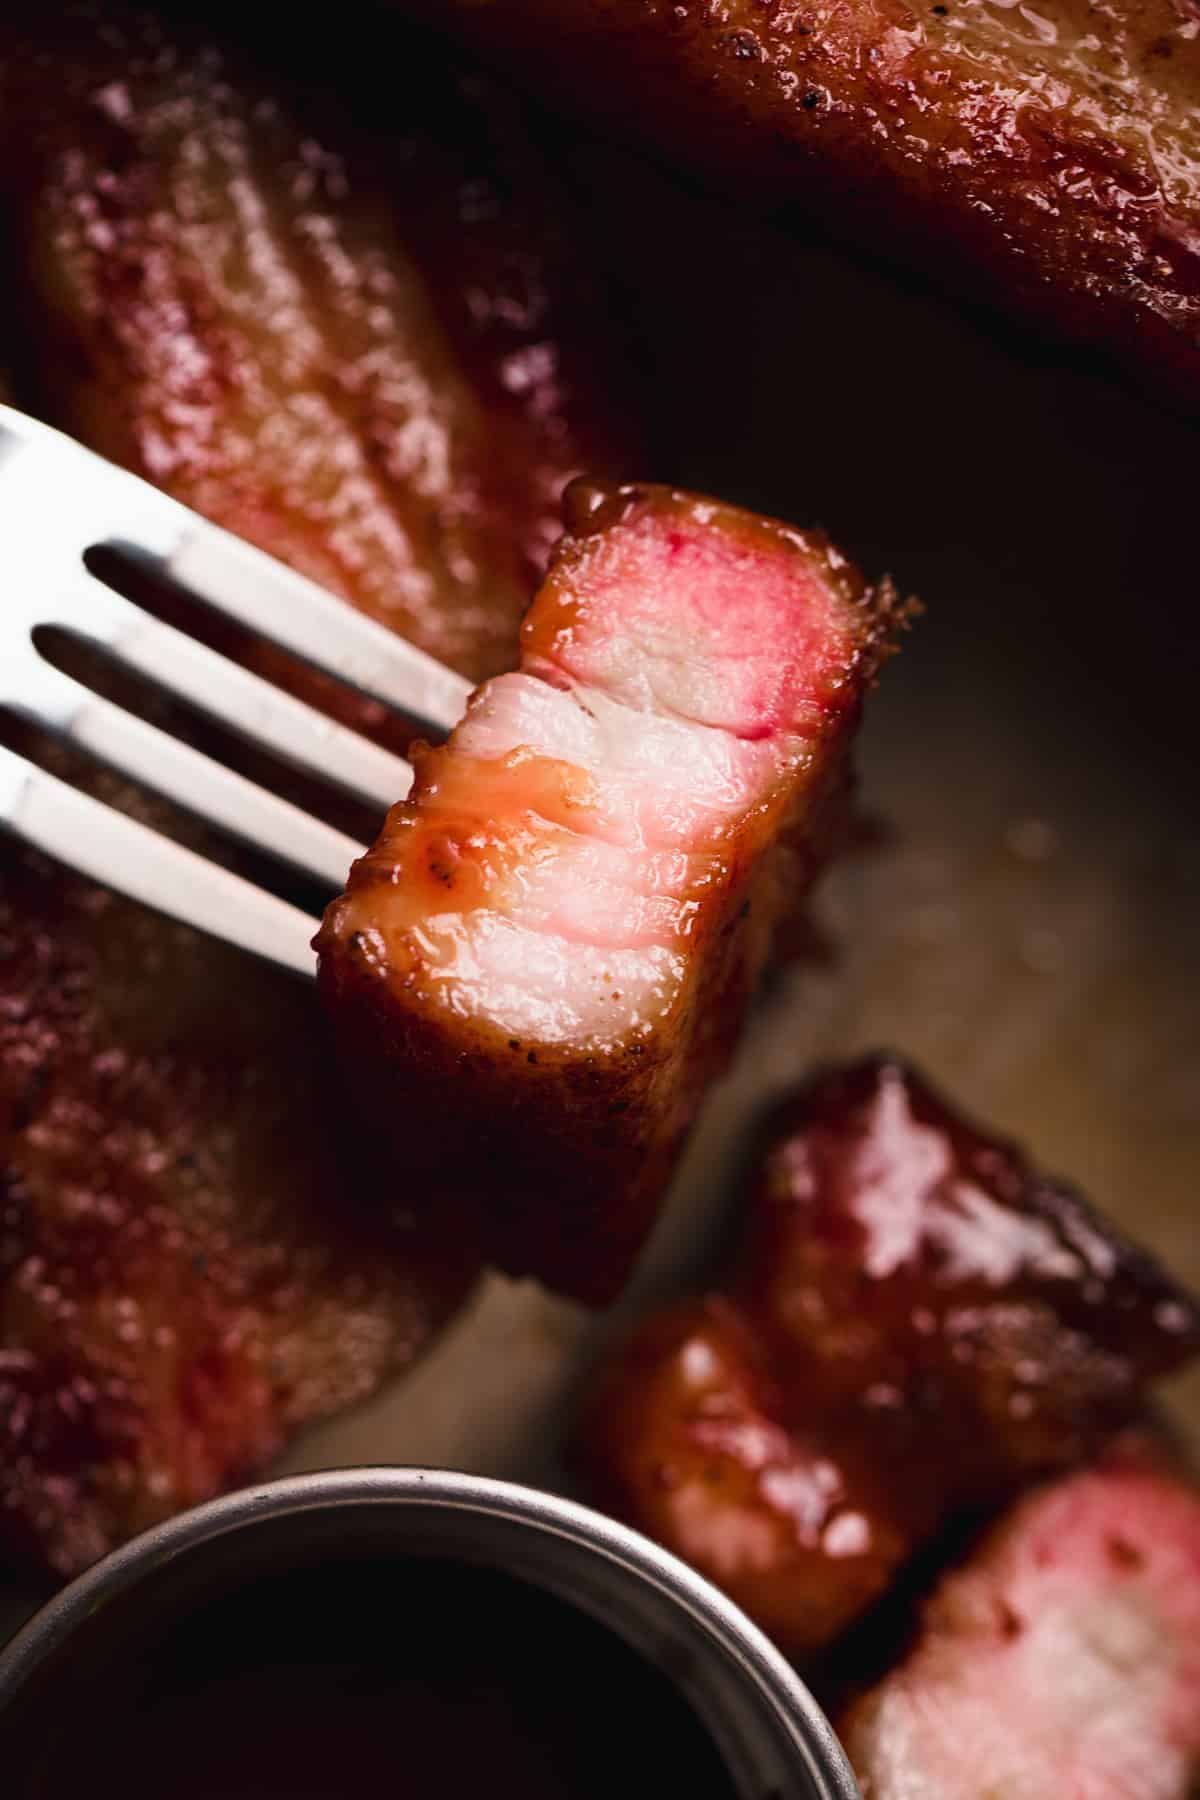 Chunk of thick pork belly sliced and on a fork showing a pink smoke ring and drizzled with some bbq sauce.